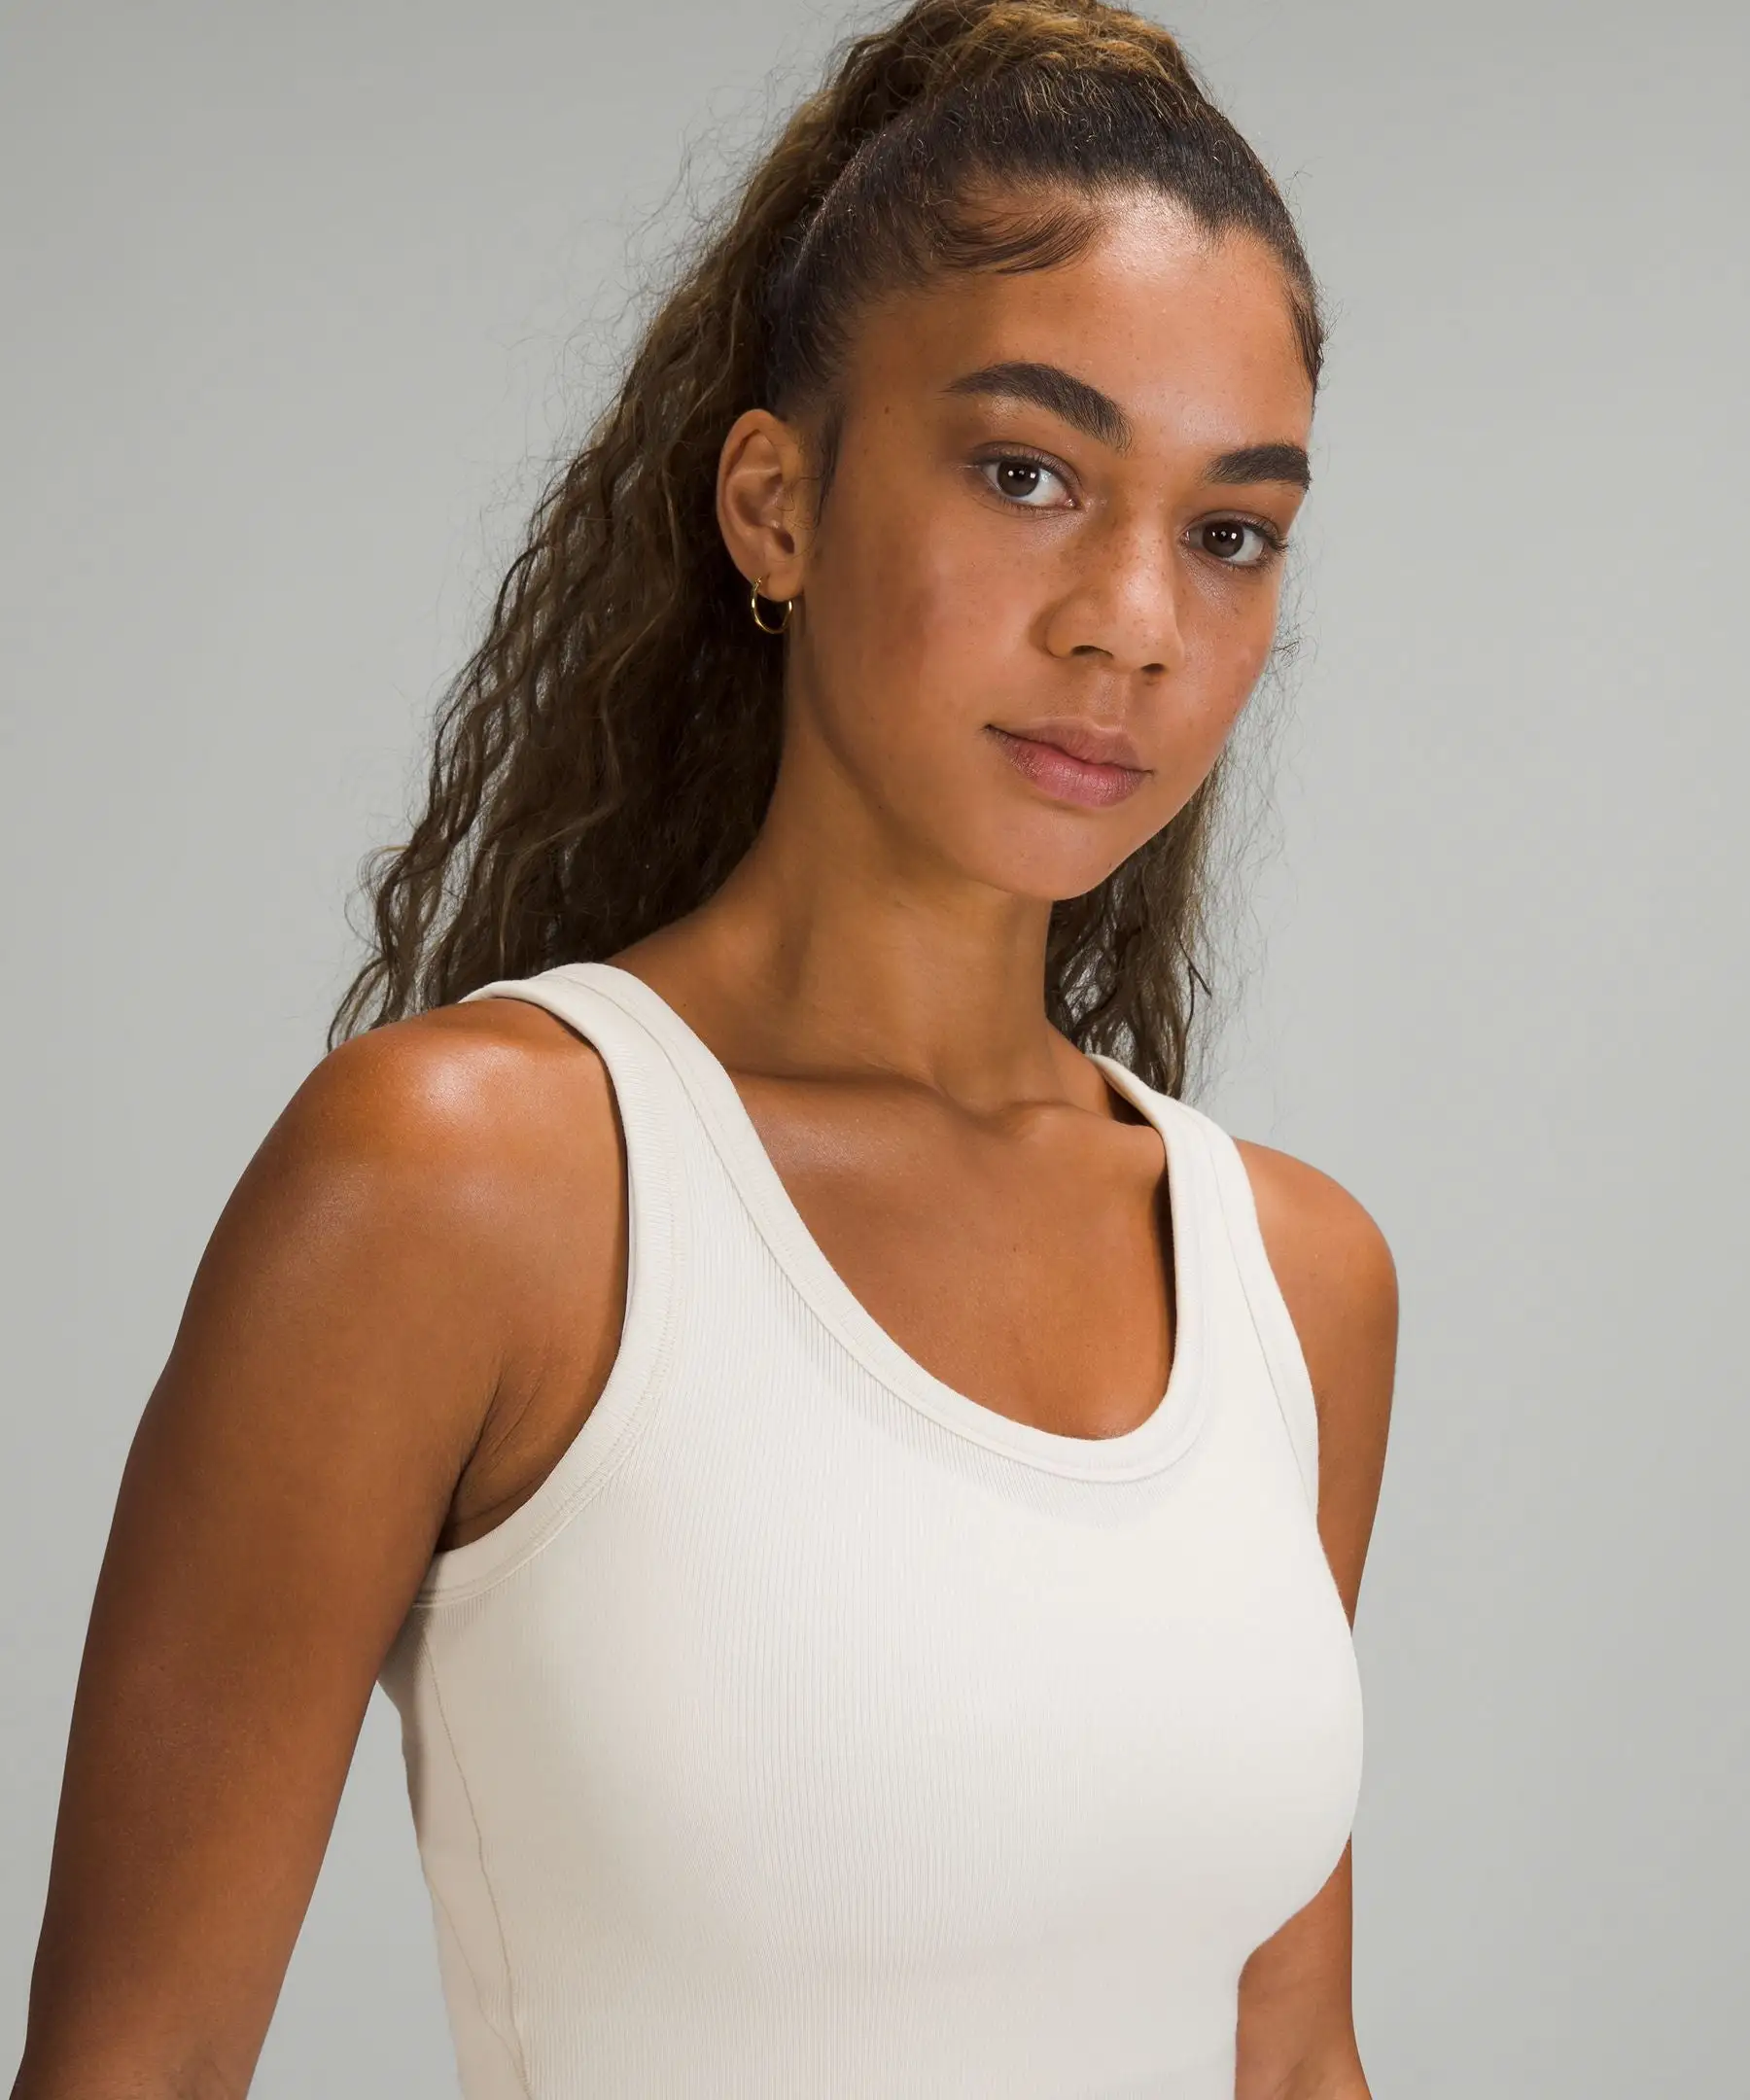 Hold Tight Scoop Neck Tank Top